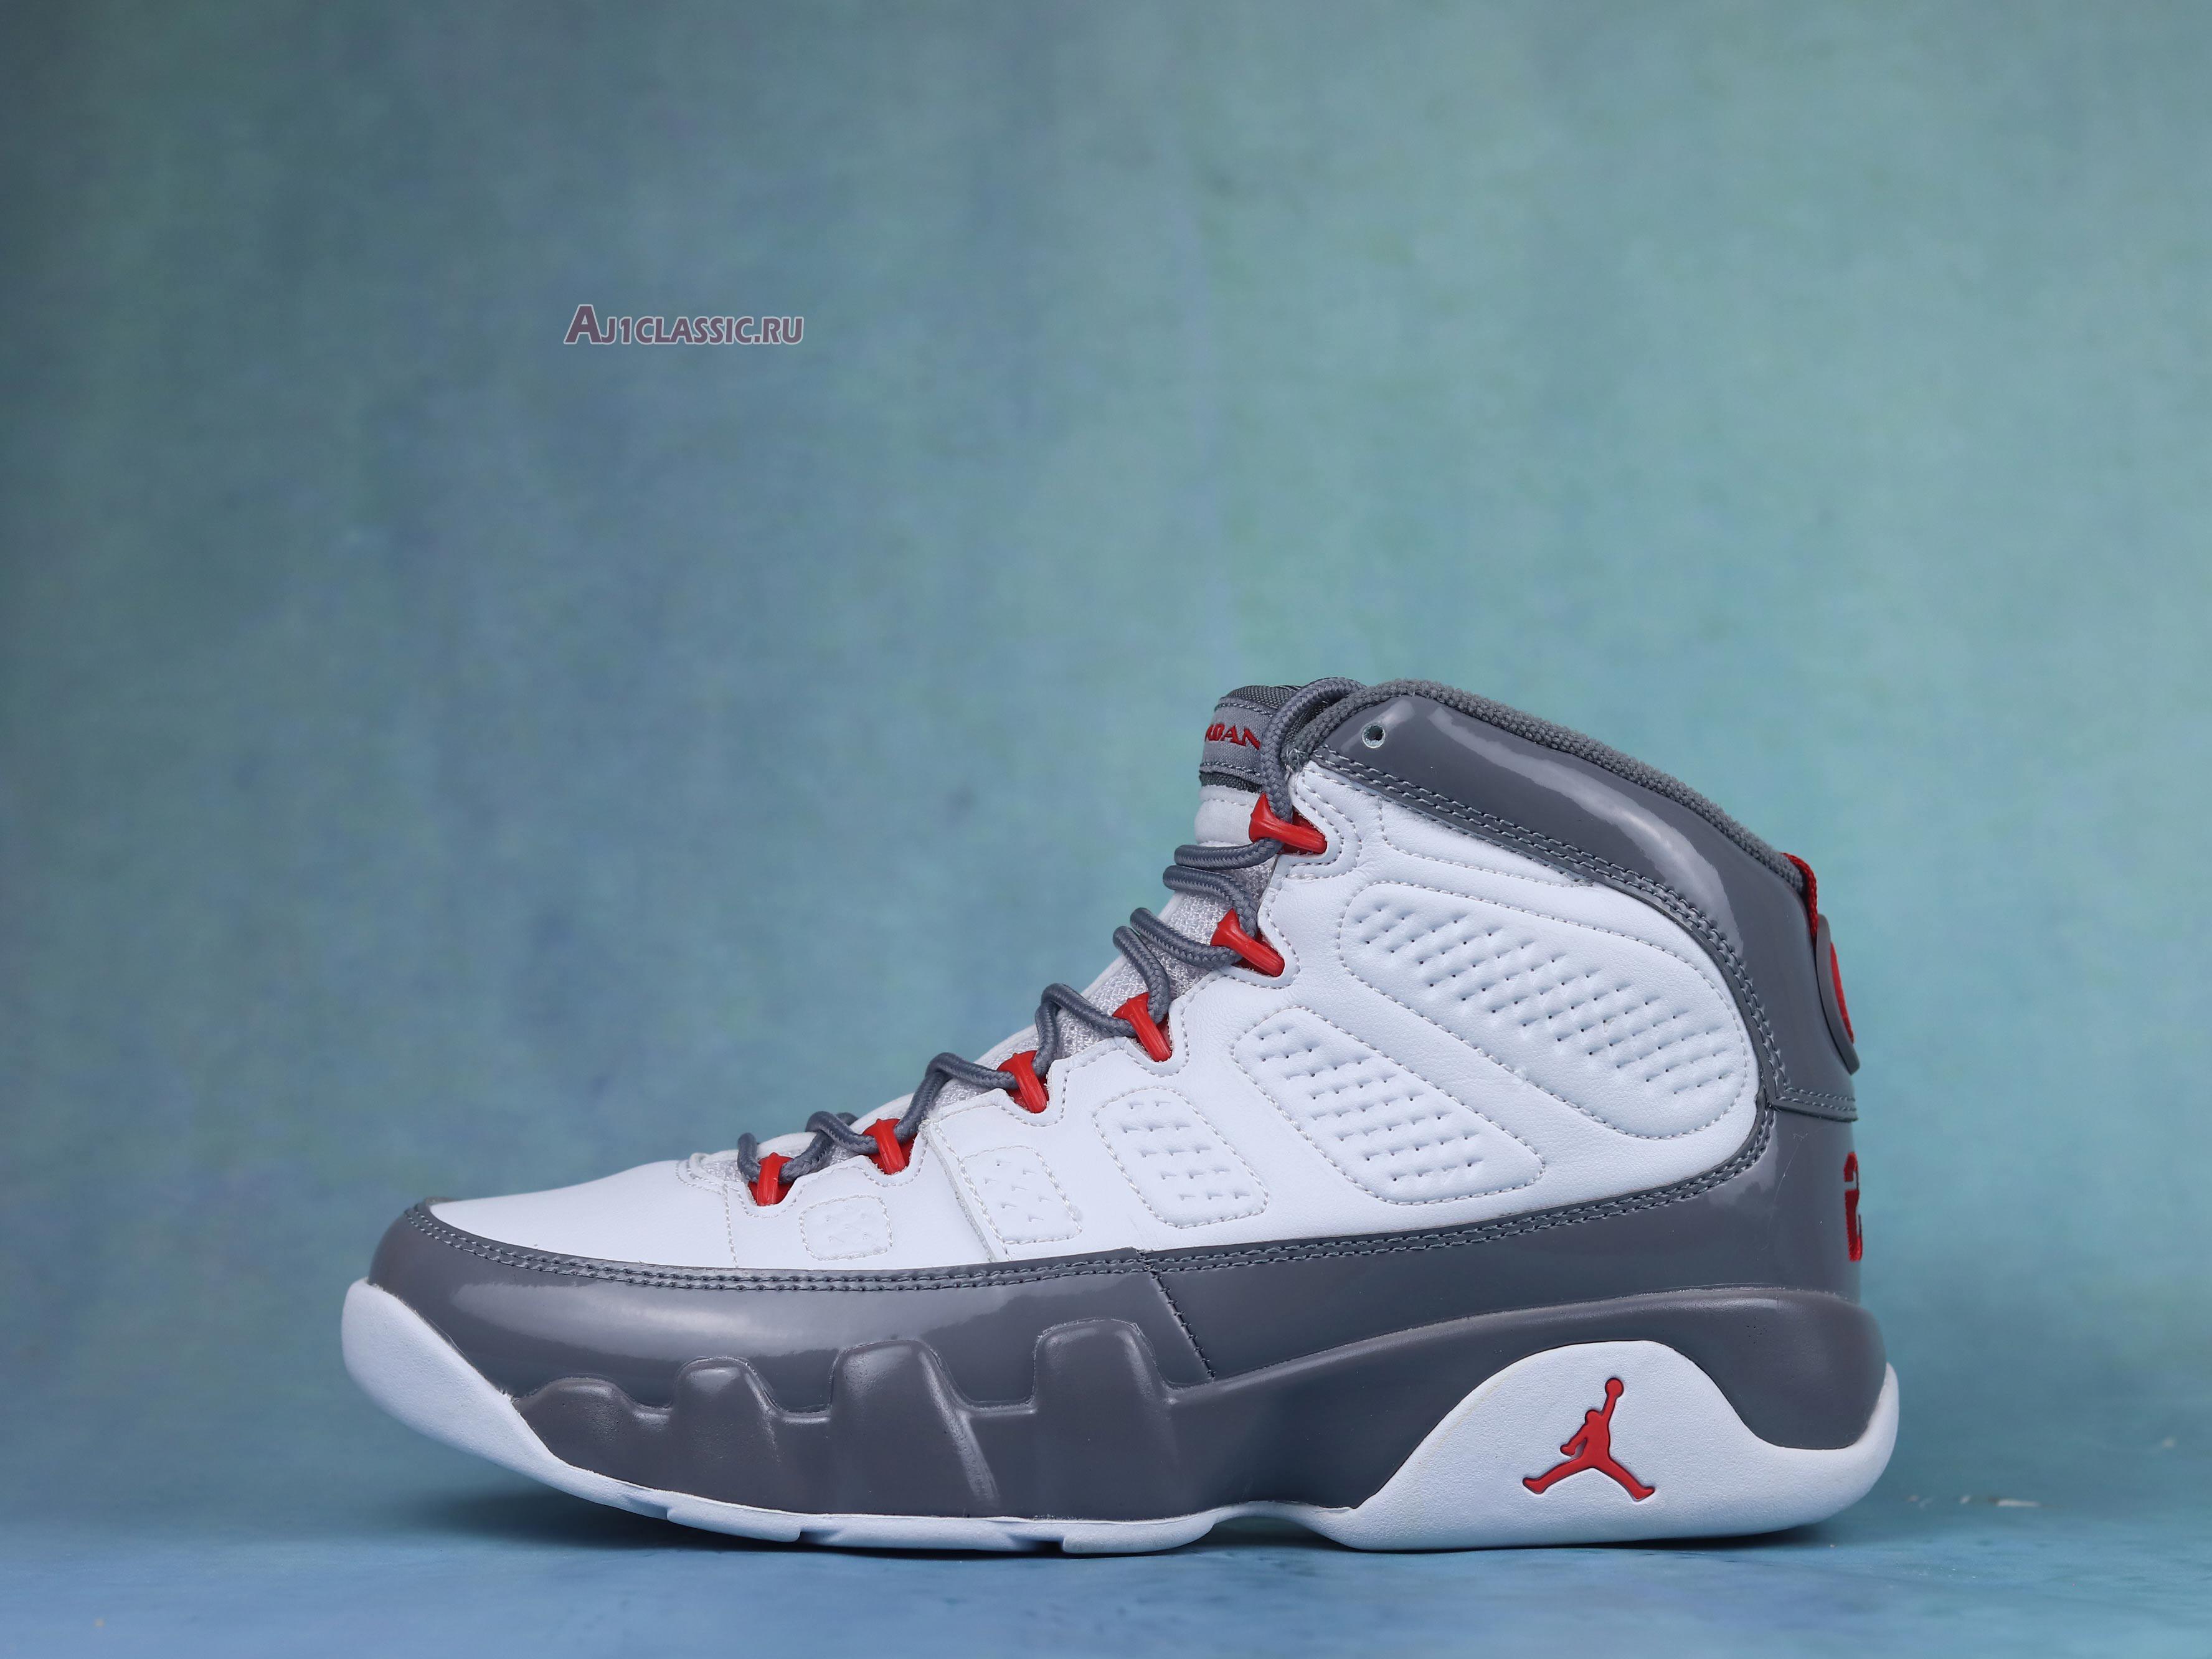 Air Jordan 9 Fire Red CT8019-162 White/Fire Red/Cool Grey Sneakers